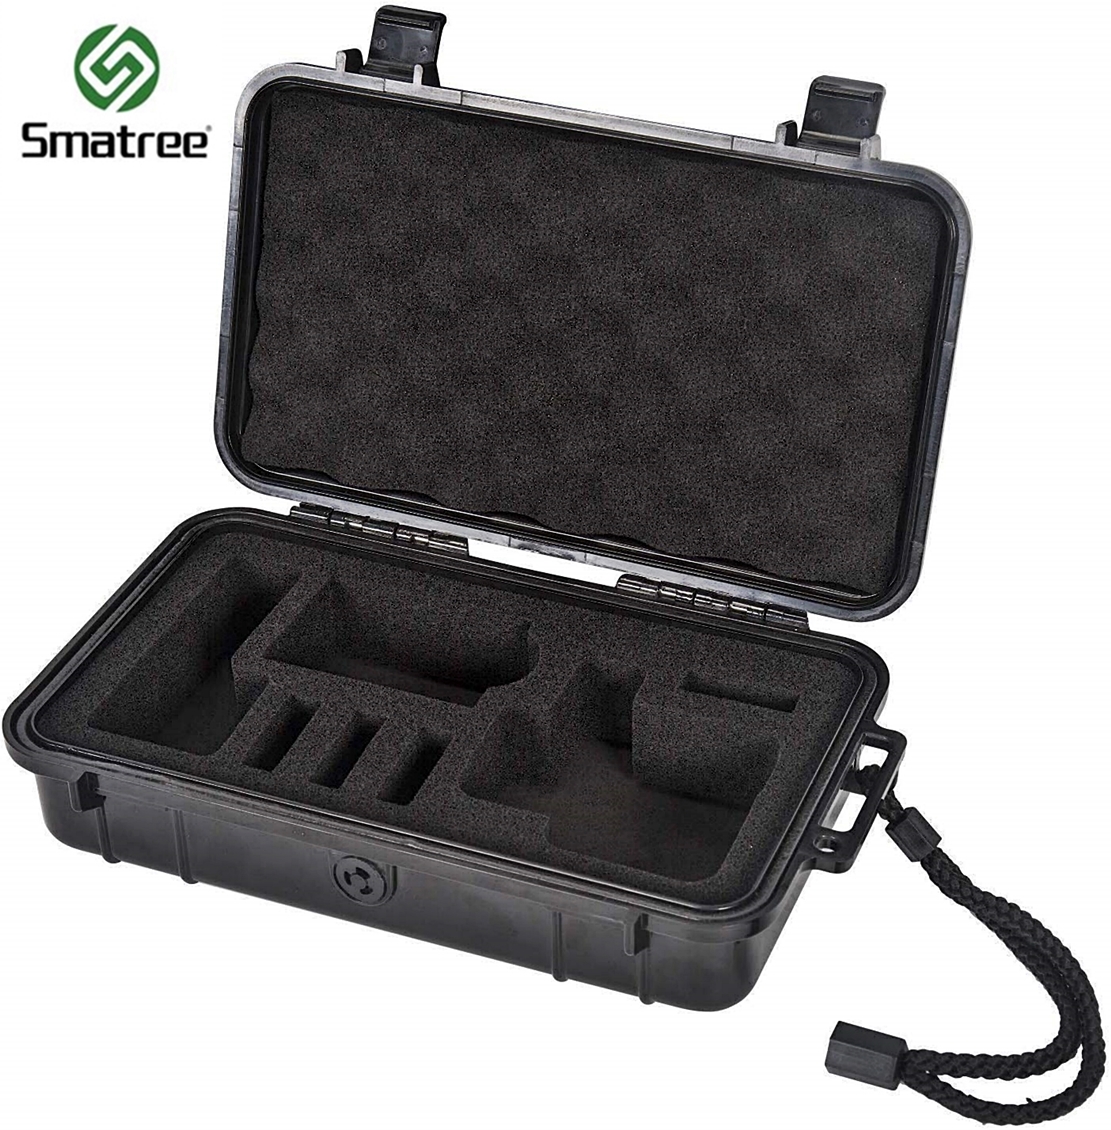 Smatree SmaCase Floaty, Water-Resist Hard Case For GoPro HERO 2018, HERO8/7/6/5/4/3/2/1 (Cameras and Accessories NOT Are Included)